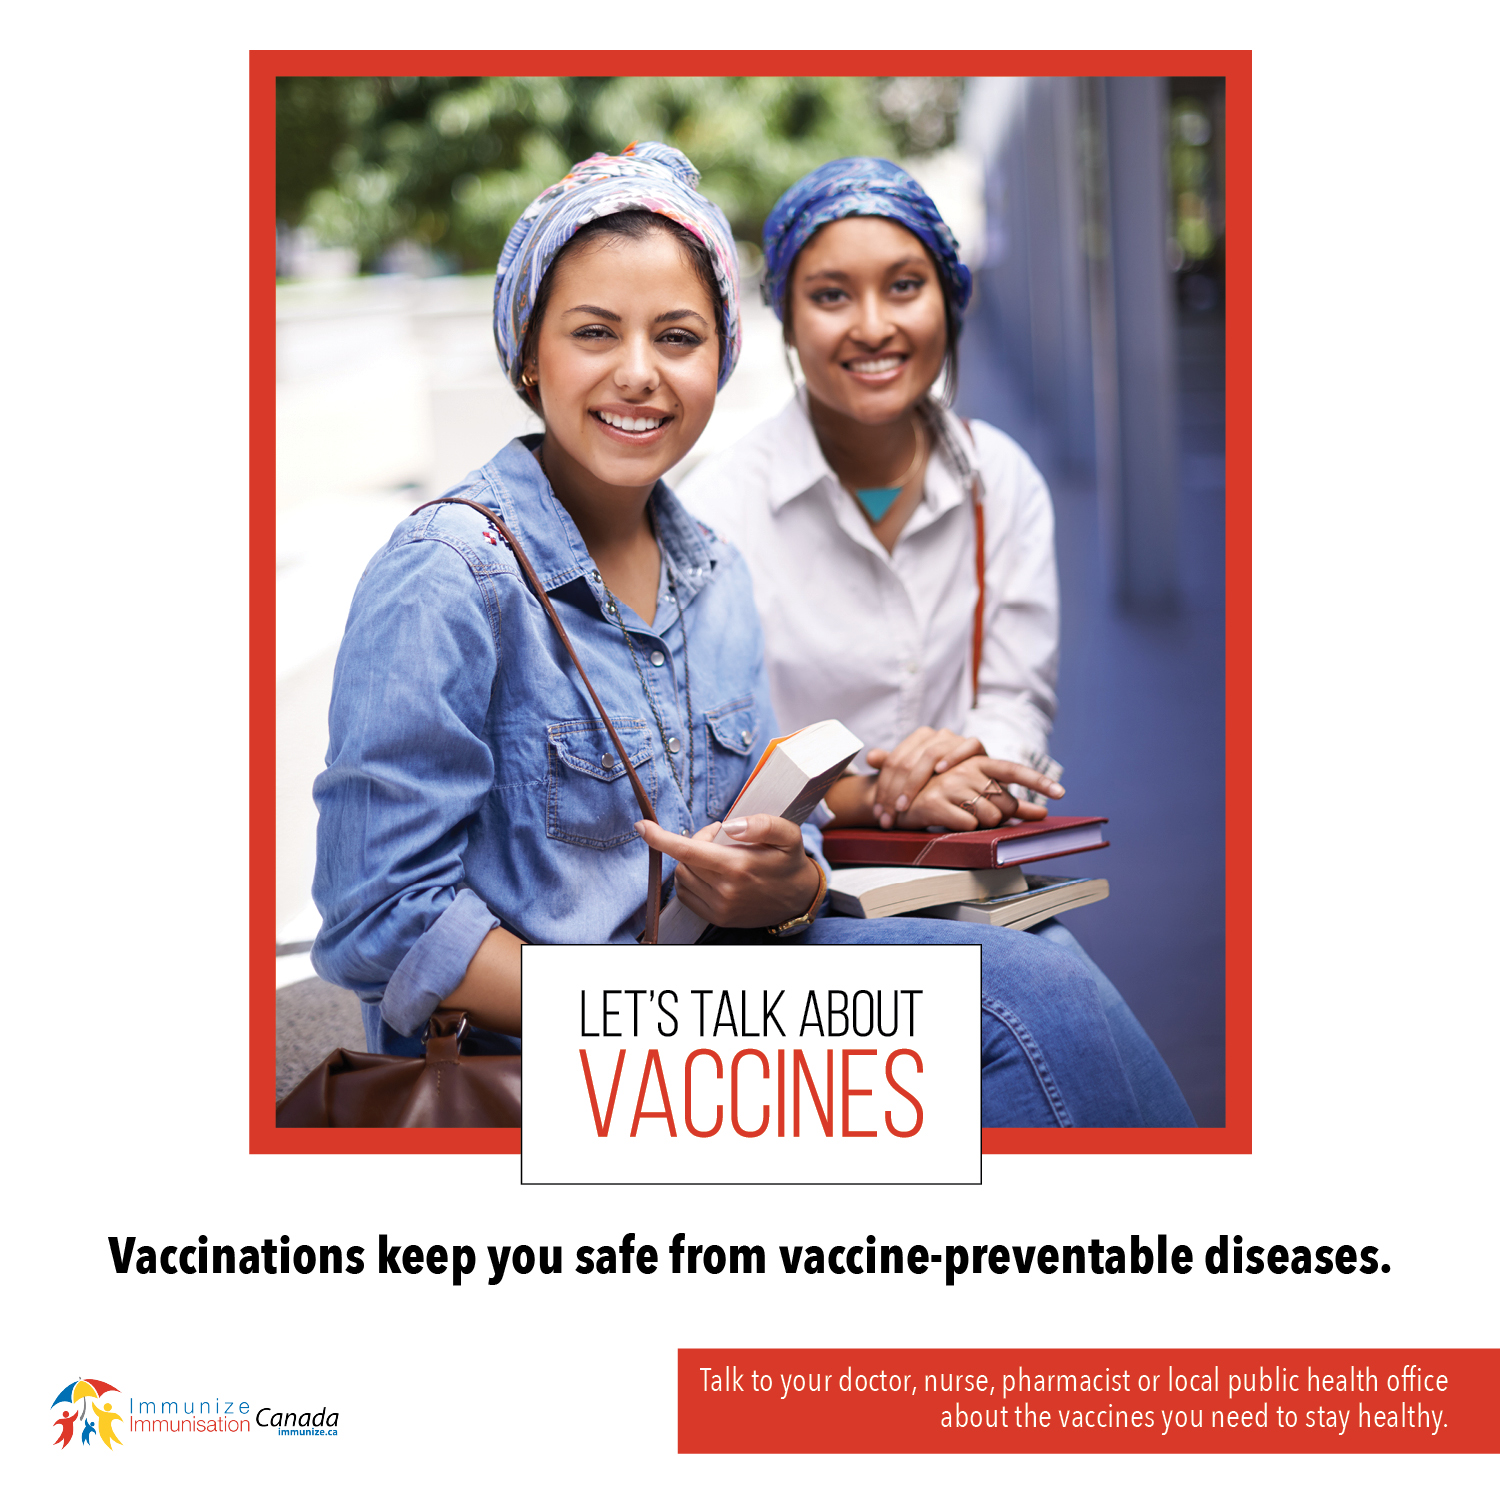 Let's talk about vaccines - image B (for Instagram/Facebook)